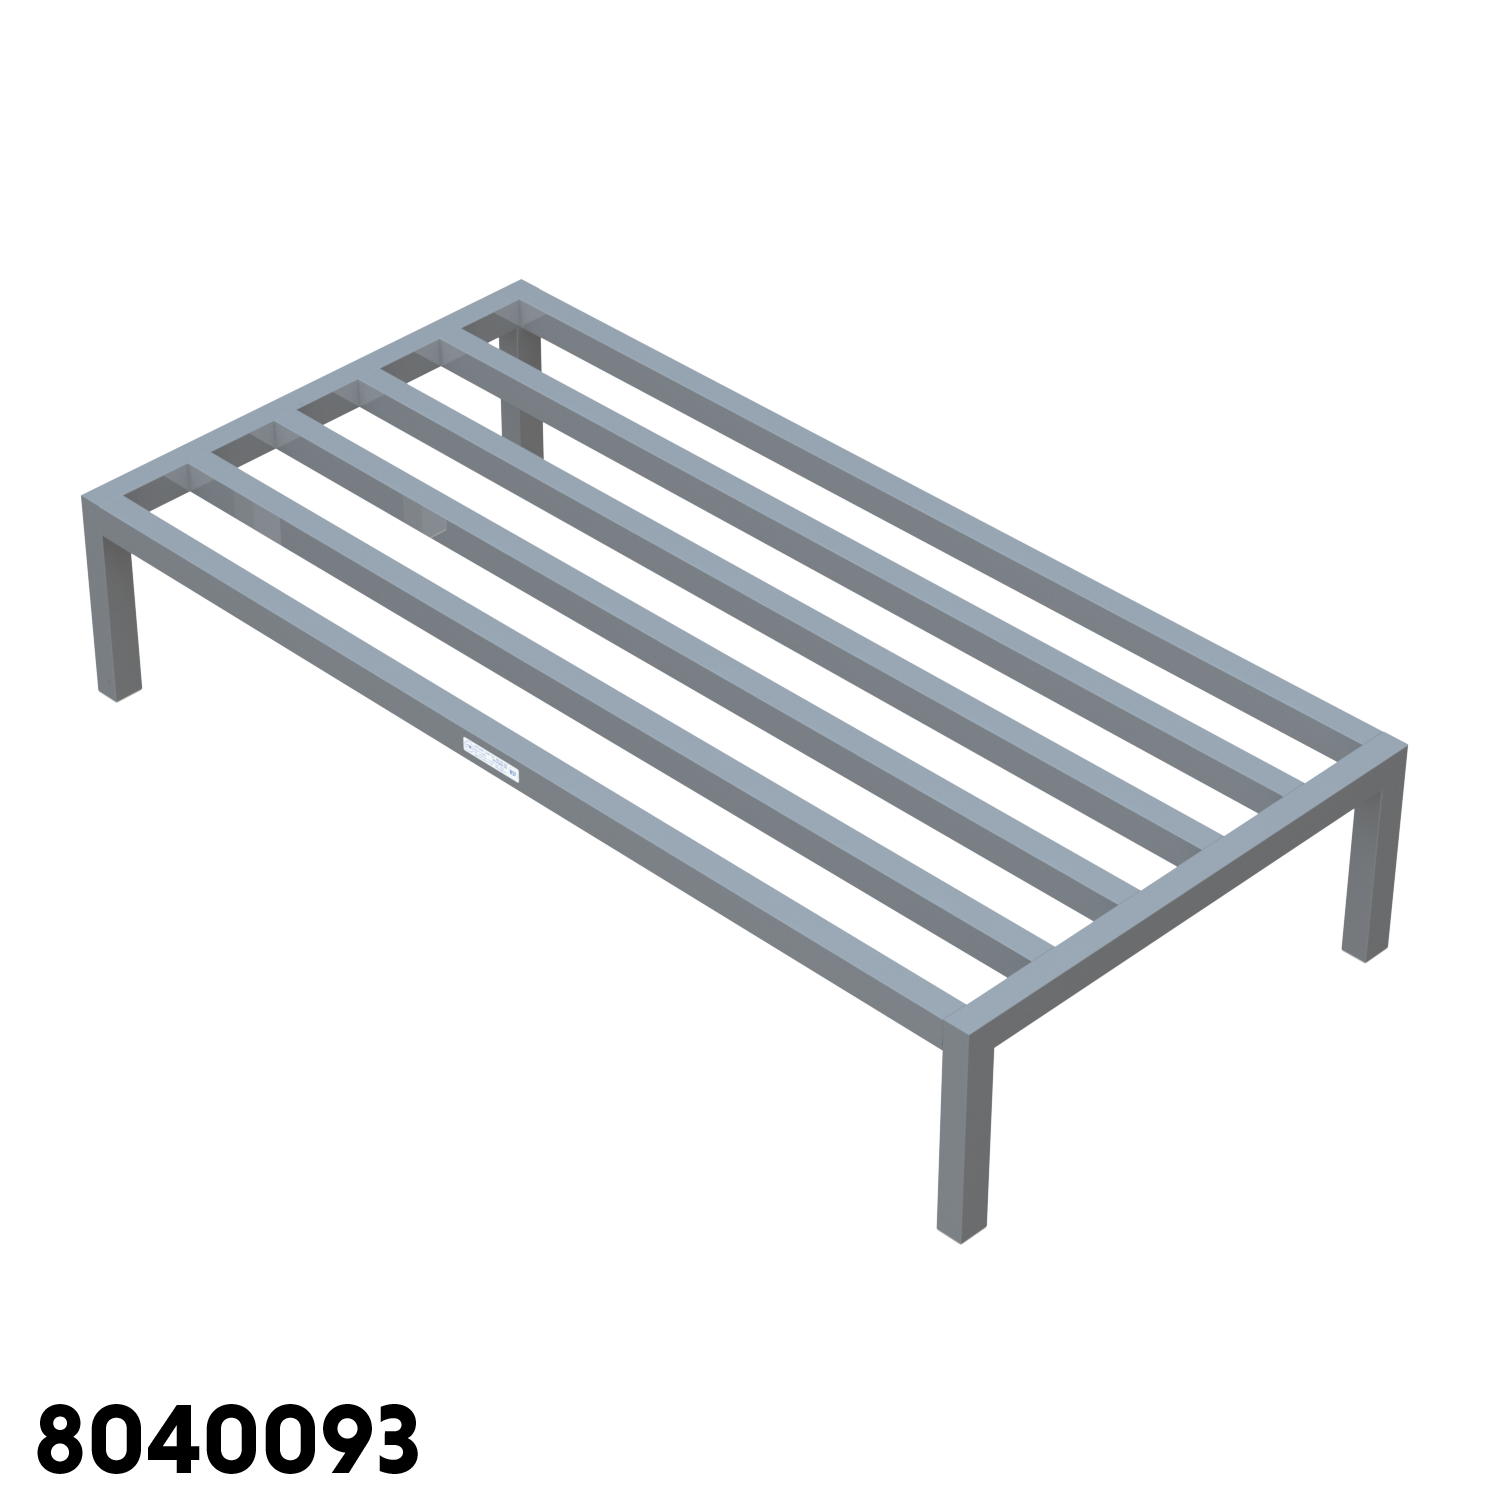 Dunnage Racks NSF certified Product Storage Keywords: Secure product storage Elevated product storage Floor-free storage Airflow around products Package life optimization Cleaning-friendly storage Material and Construction Keywords: NSF-approved racks Sanitary aluminum storage All-welded construction Heavy-duty tube racks Rustproof storage solution Lightweight product racks Stability and Sturdiness Keywords: Stable storage solution Sturdy product racks Wide base storage Reliable product support Durable storage design Maintenance and Cleaning Keywords: Easy maintenance storage Hygienic storage solution Cleaning-friendly racks Rust-resistant storage Long-lasting cleanliness NSF Compliance Keywords: NSF standards storage NSF-approved product racks Food safety compliant storage Quality assurance in storage Sanitary storage solution General Keywords: Durable product racks Long-lasting storage solution Lightweight storage design Optimal package life Efficient airflow storage